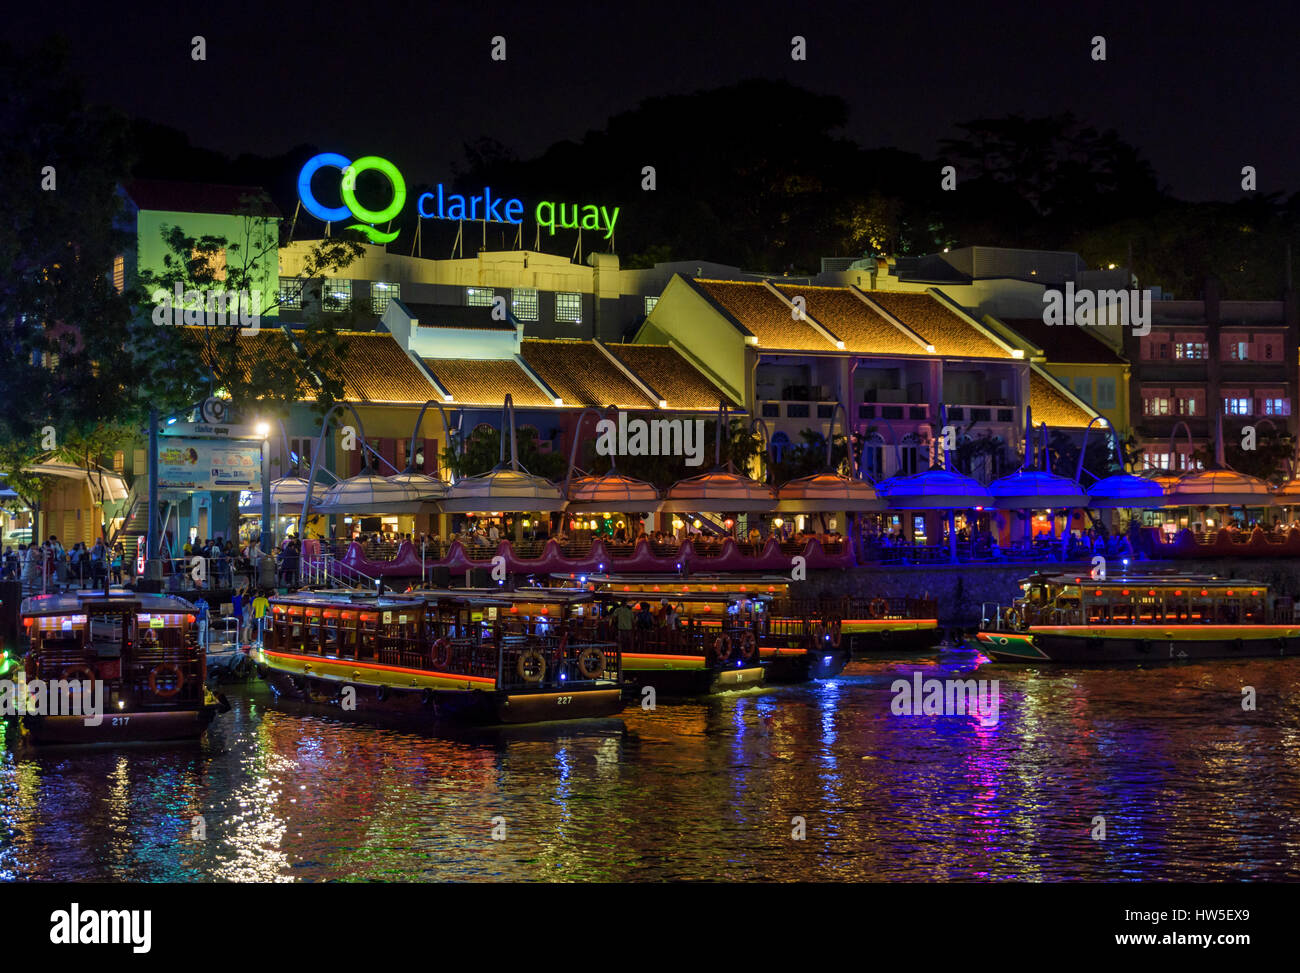 Clarke Quay outdoor precinct at night with busy cafes and restaurants along the riverside, Clarke Quay, Singapore Stock Photo